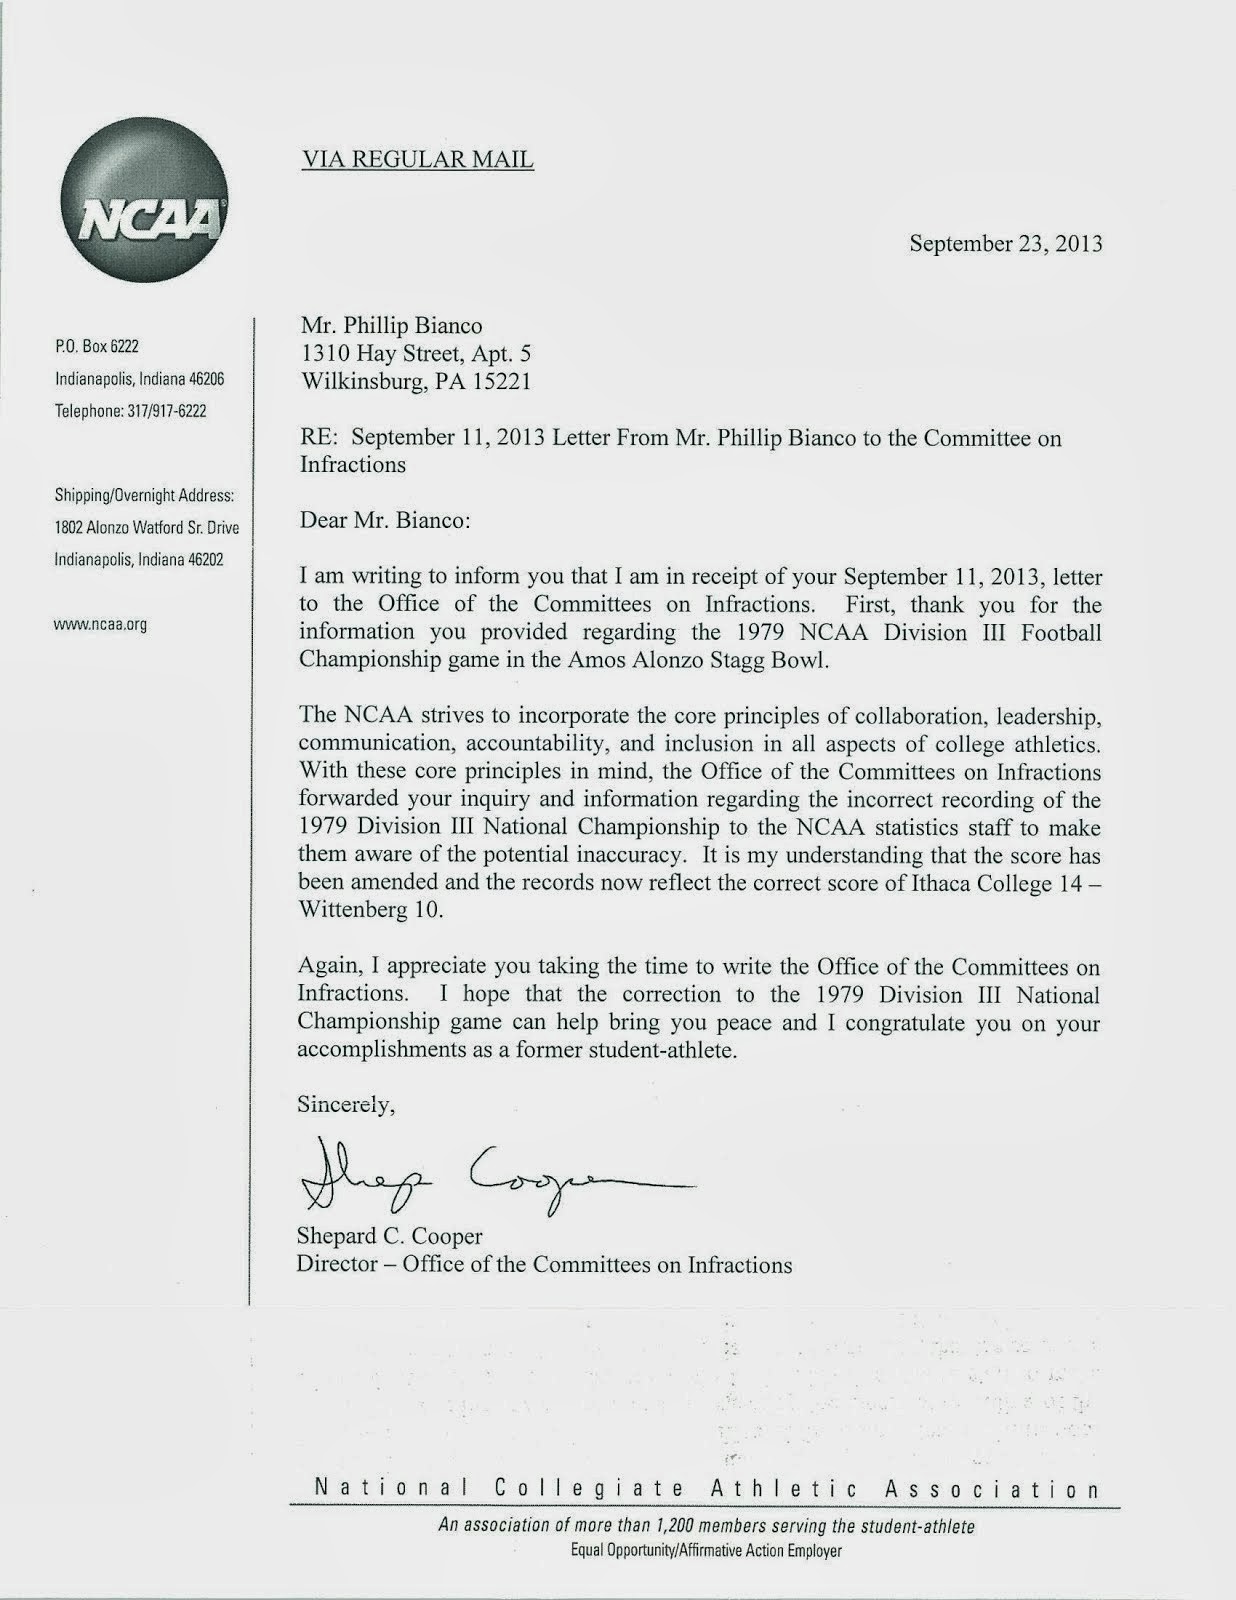 Response from NCAA